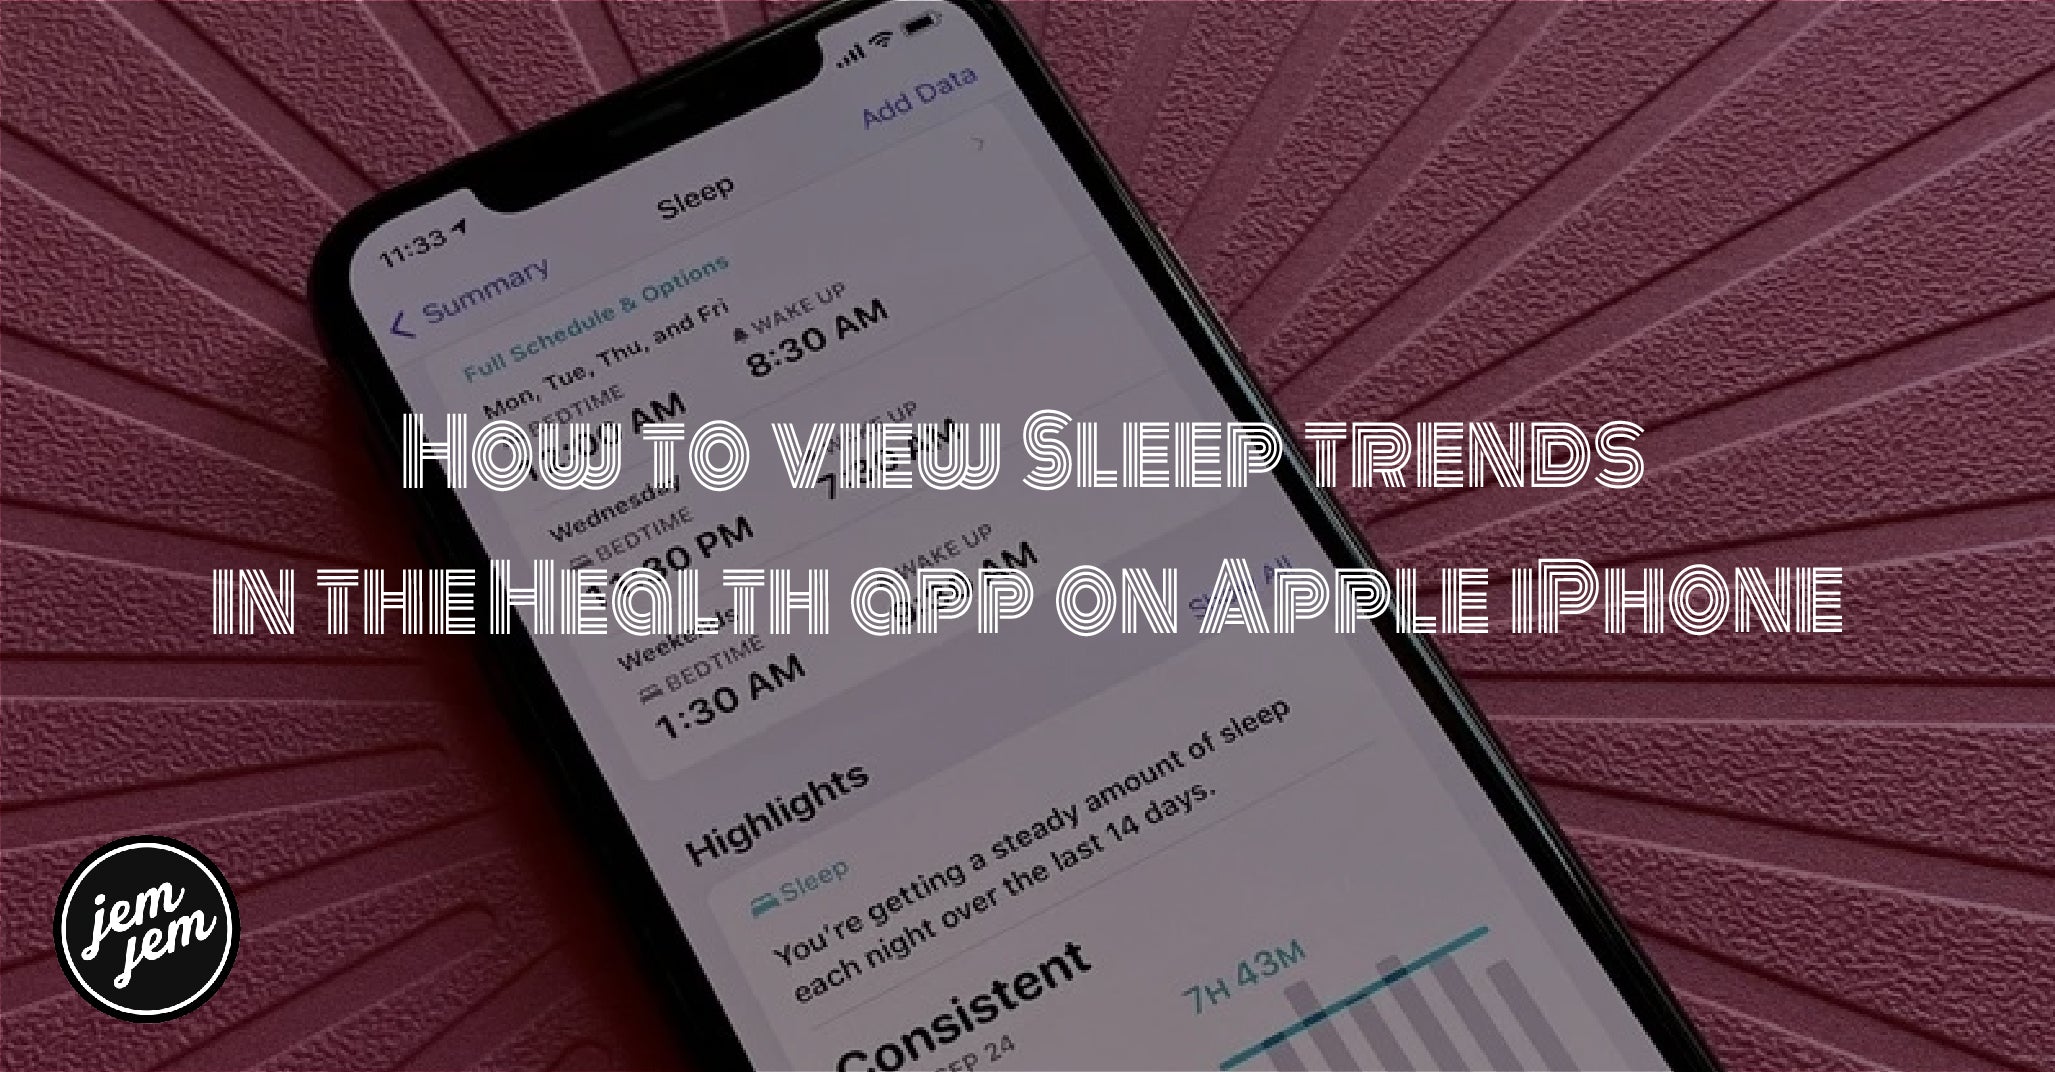 How to view Sleep trends  in the Health app on Apple iPhone